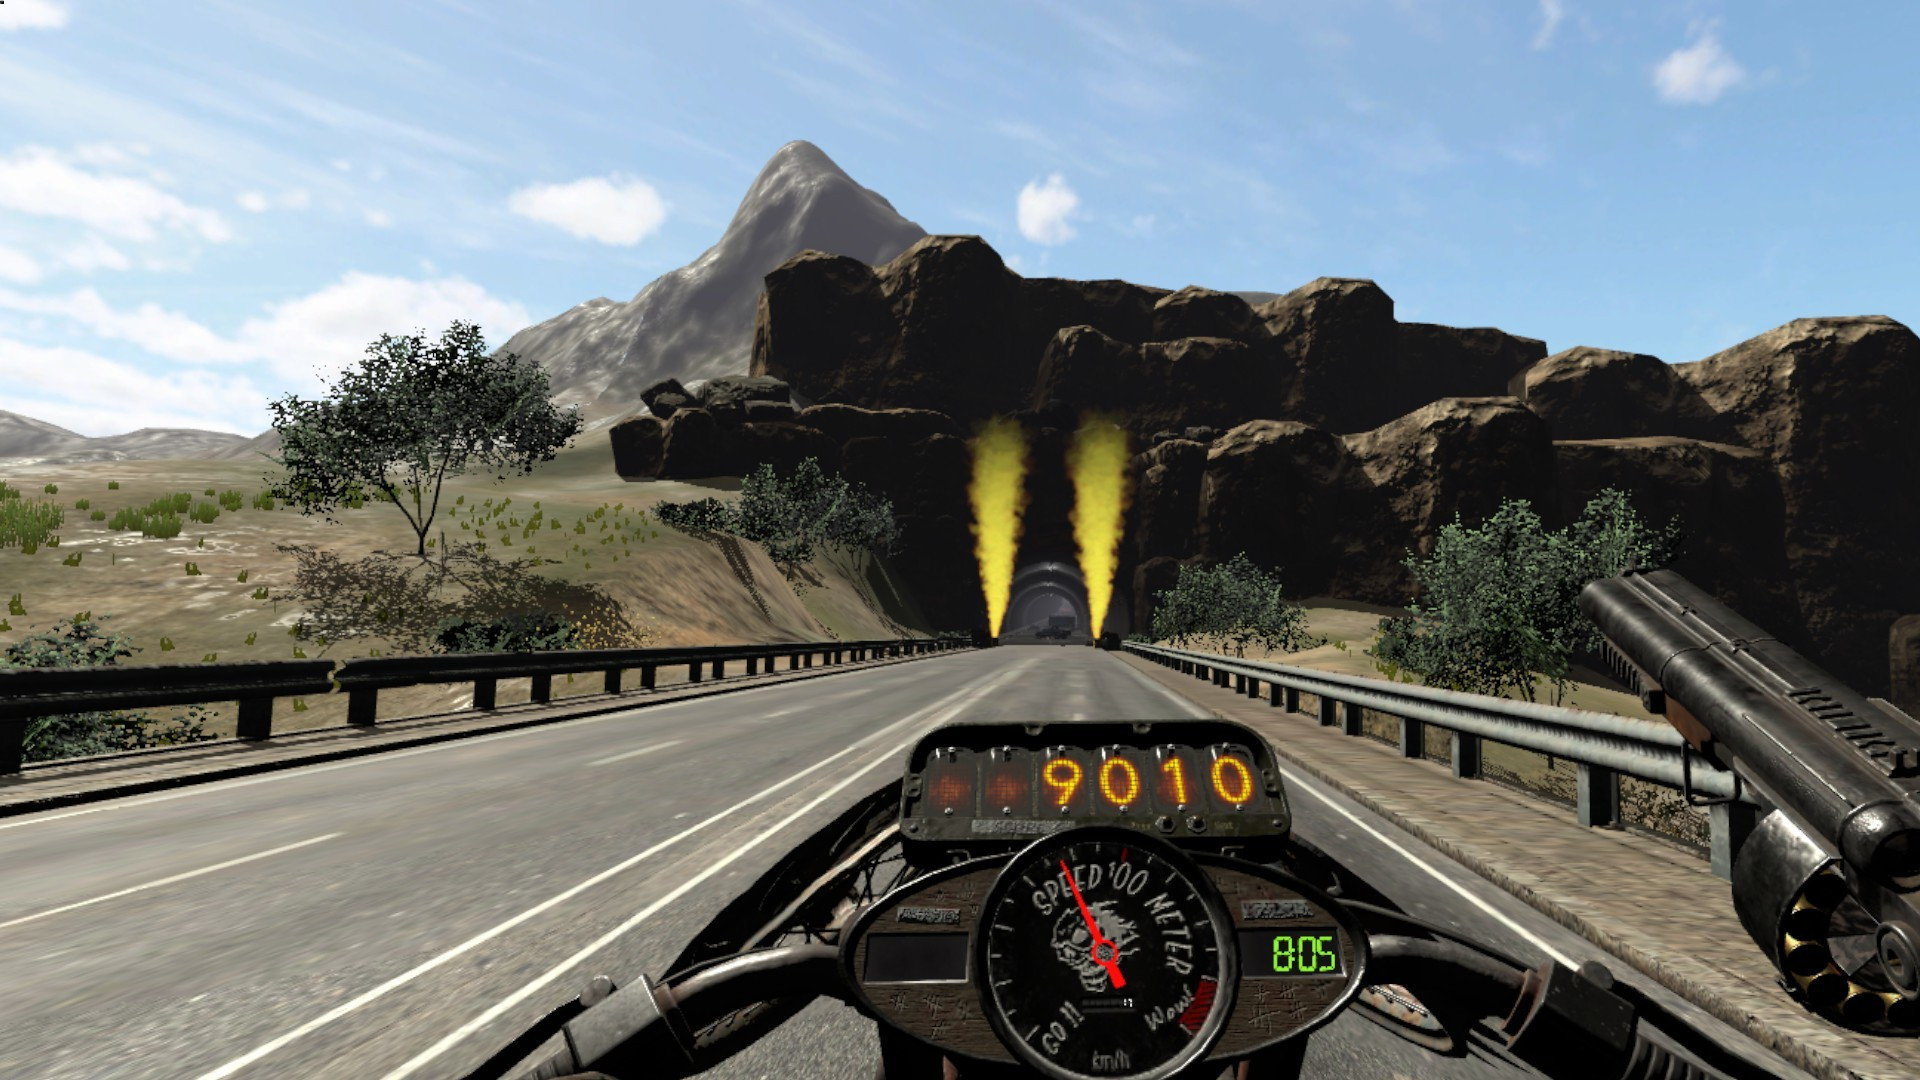 Hell Road VR